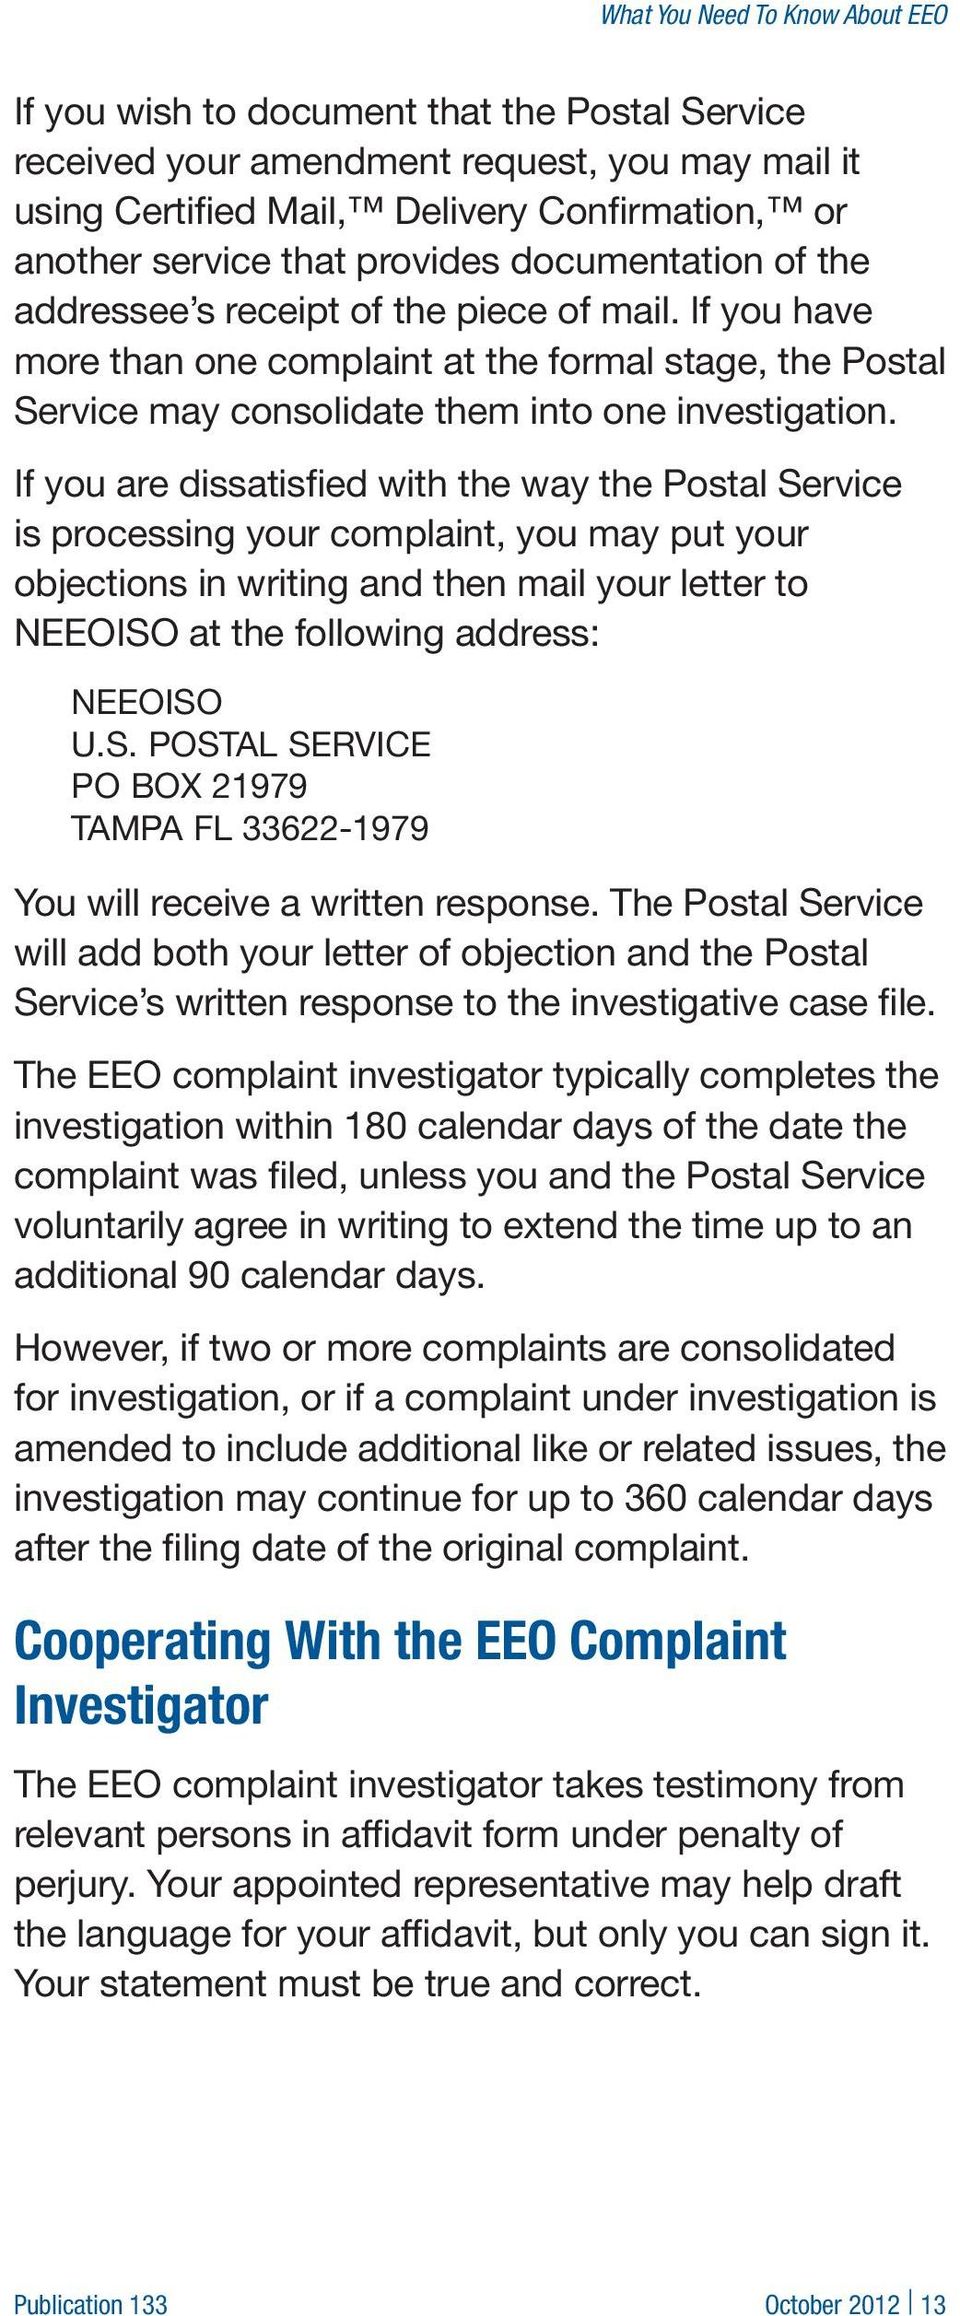 If you are dissatisfied with the way the Postal Service is processing your complaint, you may put your objections in writing and then mail your letter to NEEOISO at the following address: NEEOISO U.S. POSTAL SERVICE PO BOX 21979 TAMPA FL 33622-1979 You will receive a written response.